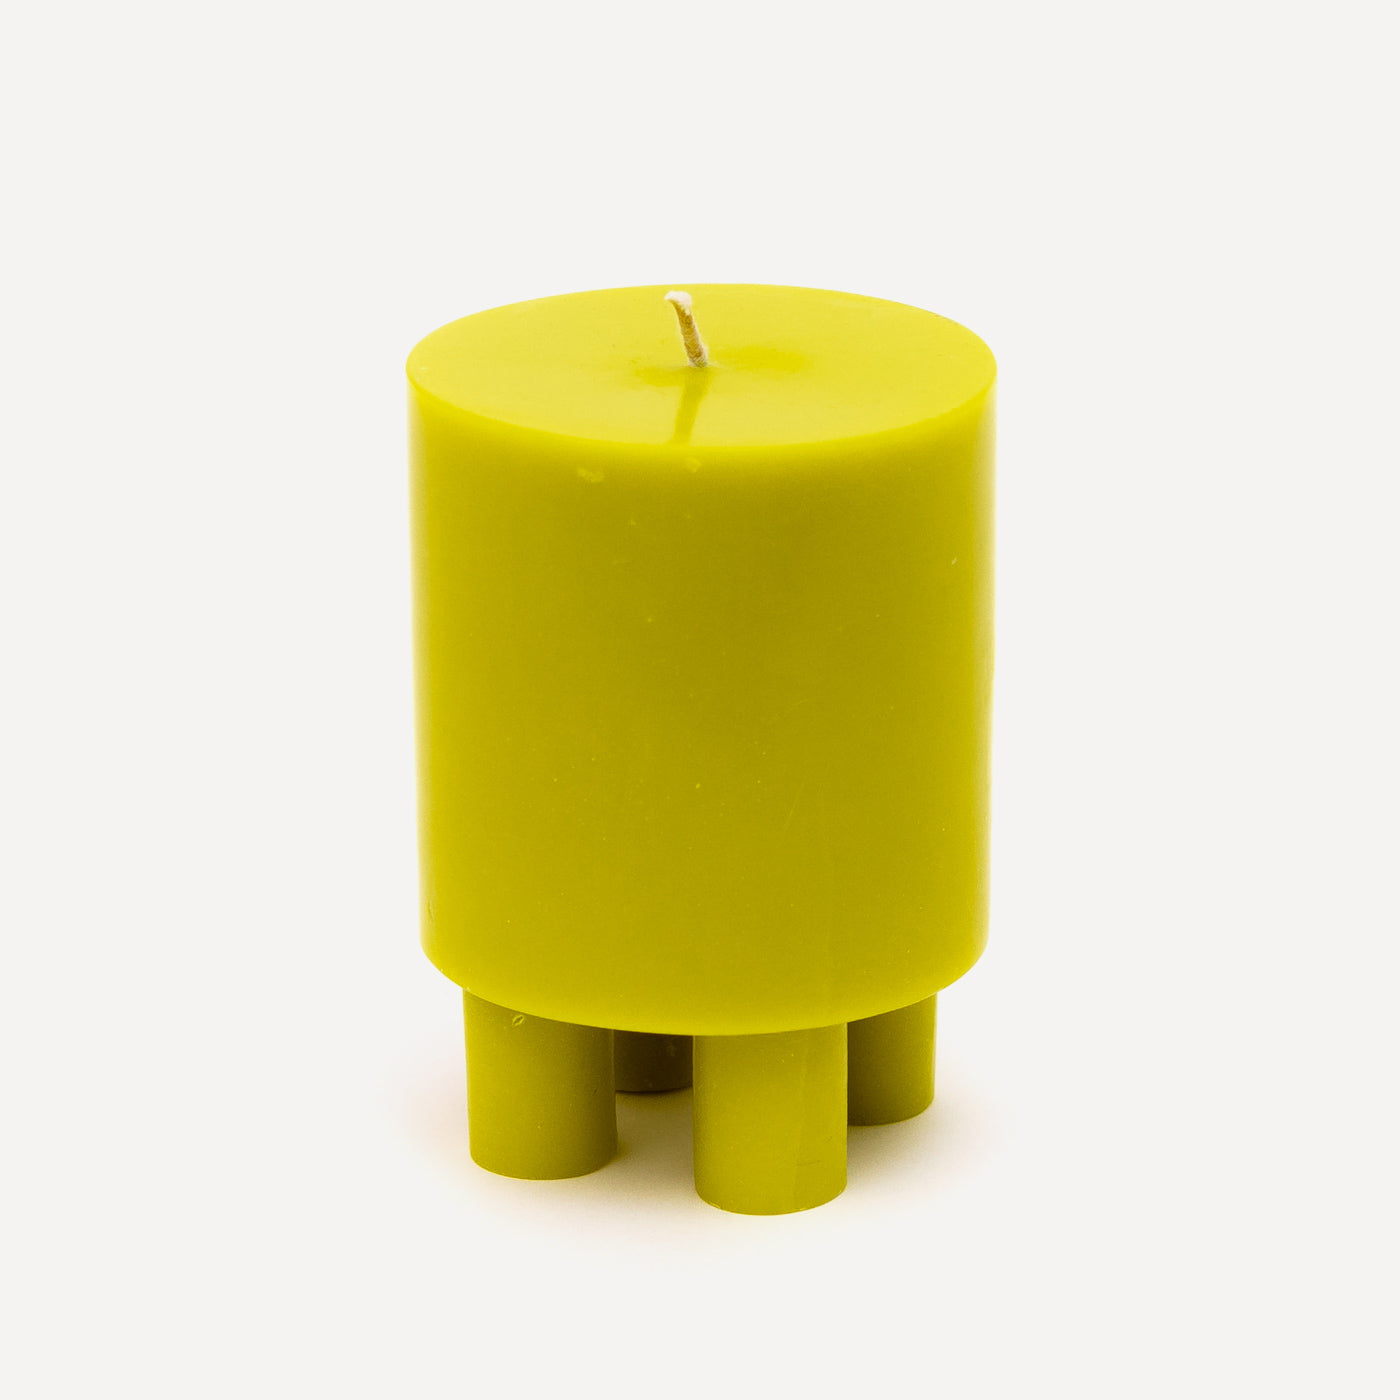 Stack Candle Prop, shaped candles by Yod and co in acid yellow